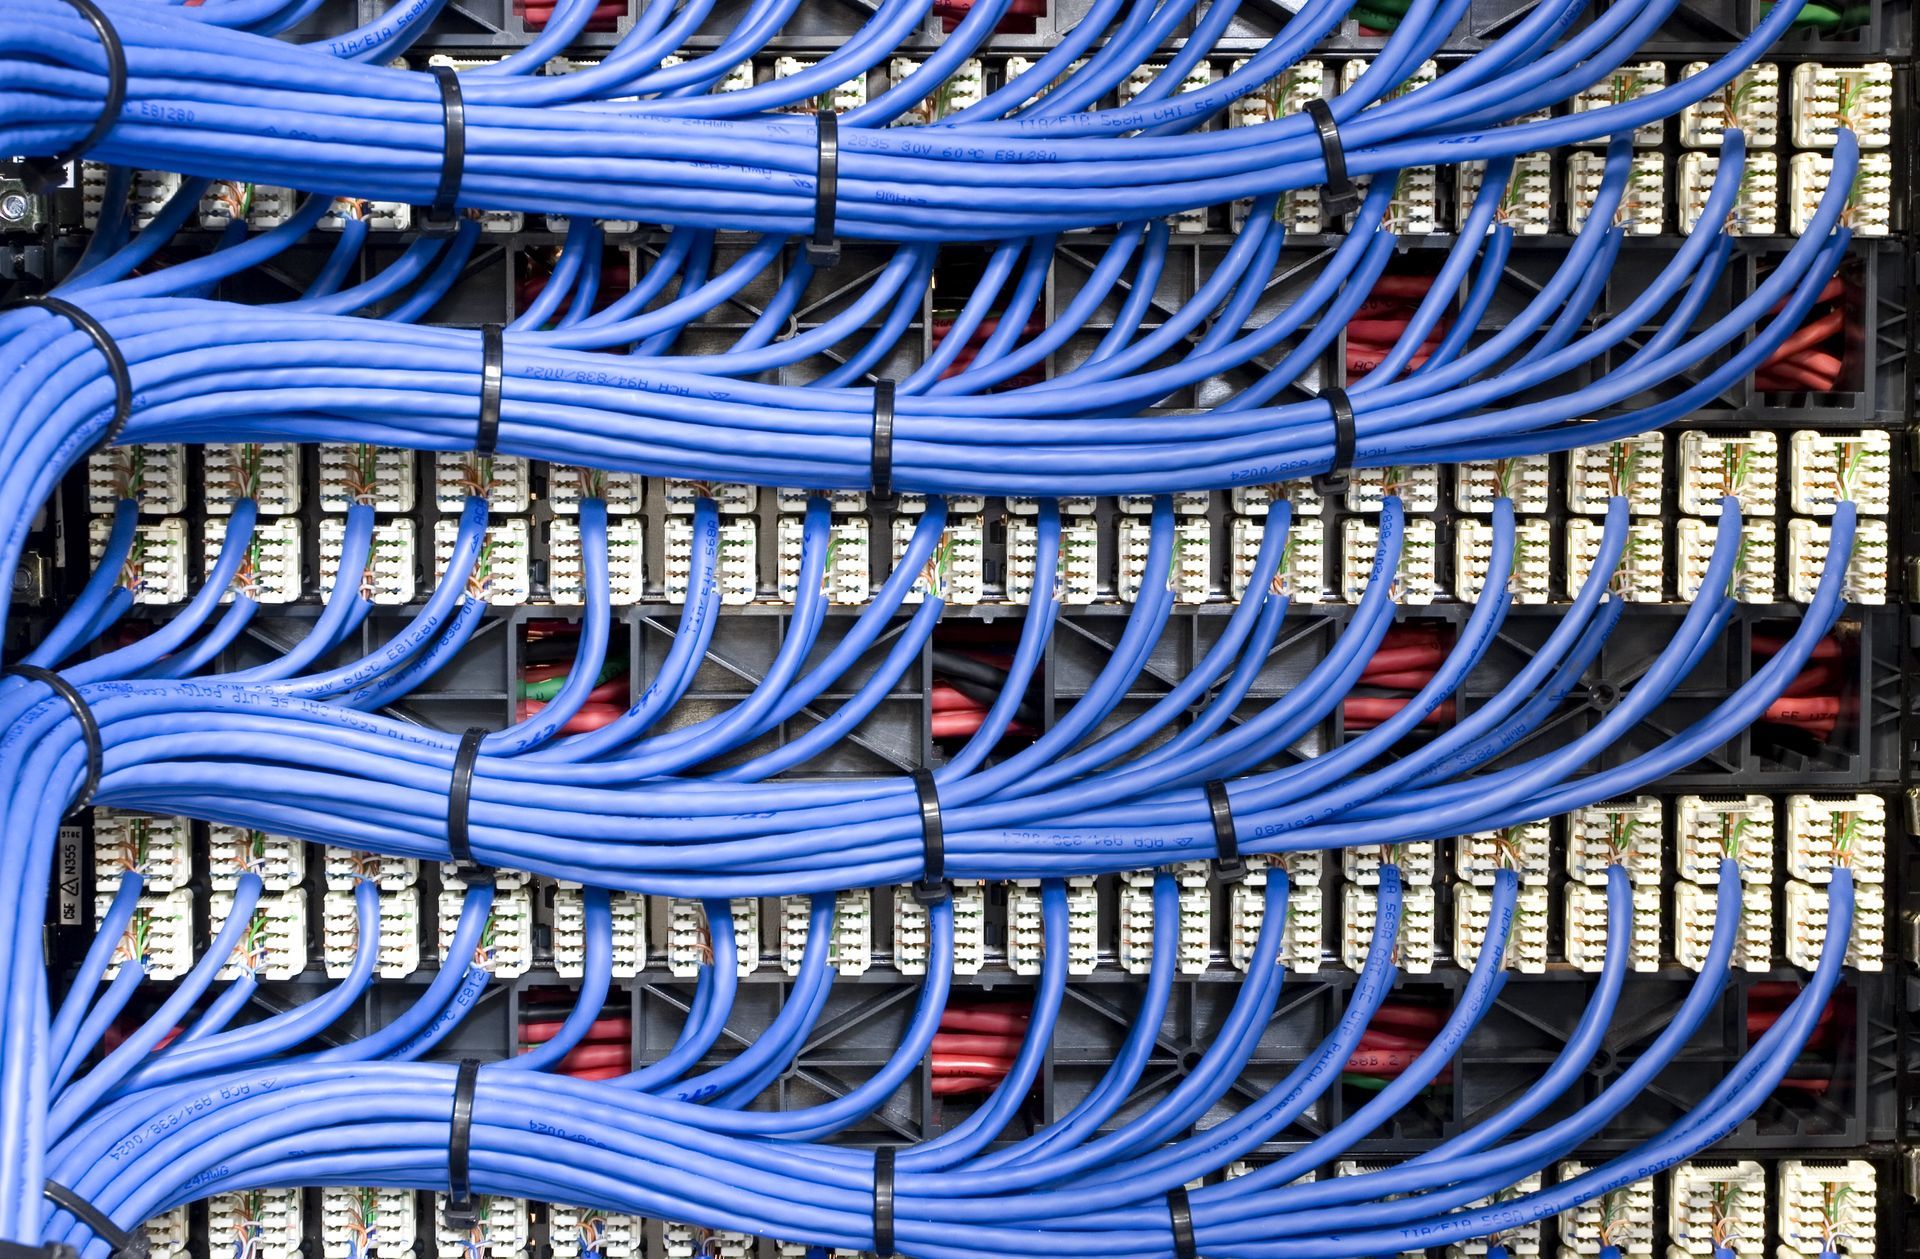 Network Cables and Hub — IT Services in Corte Madera, CA